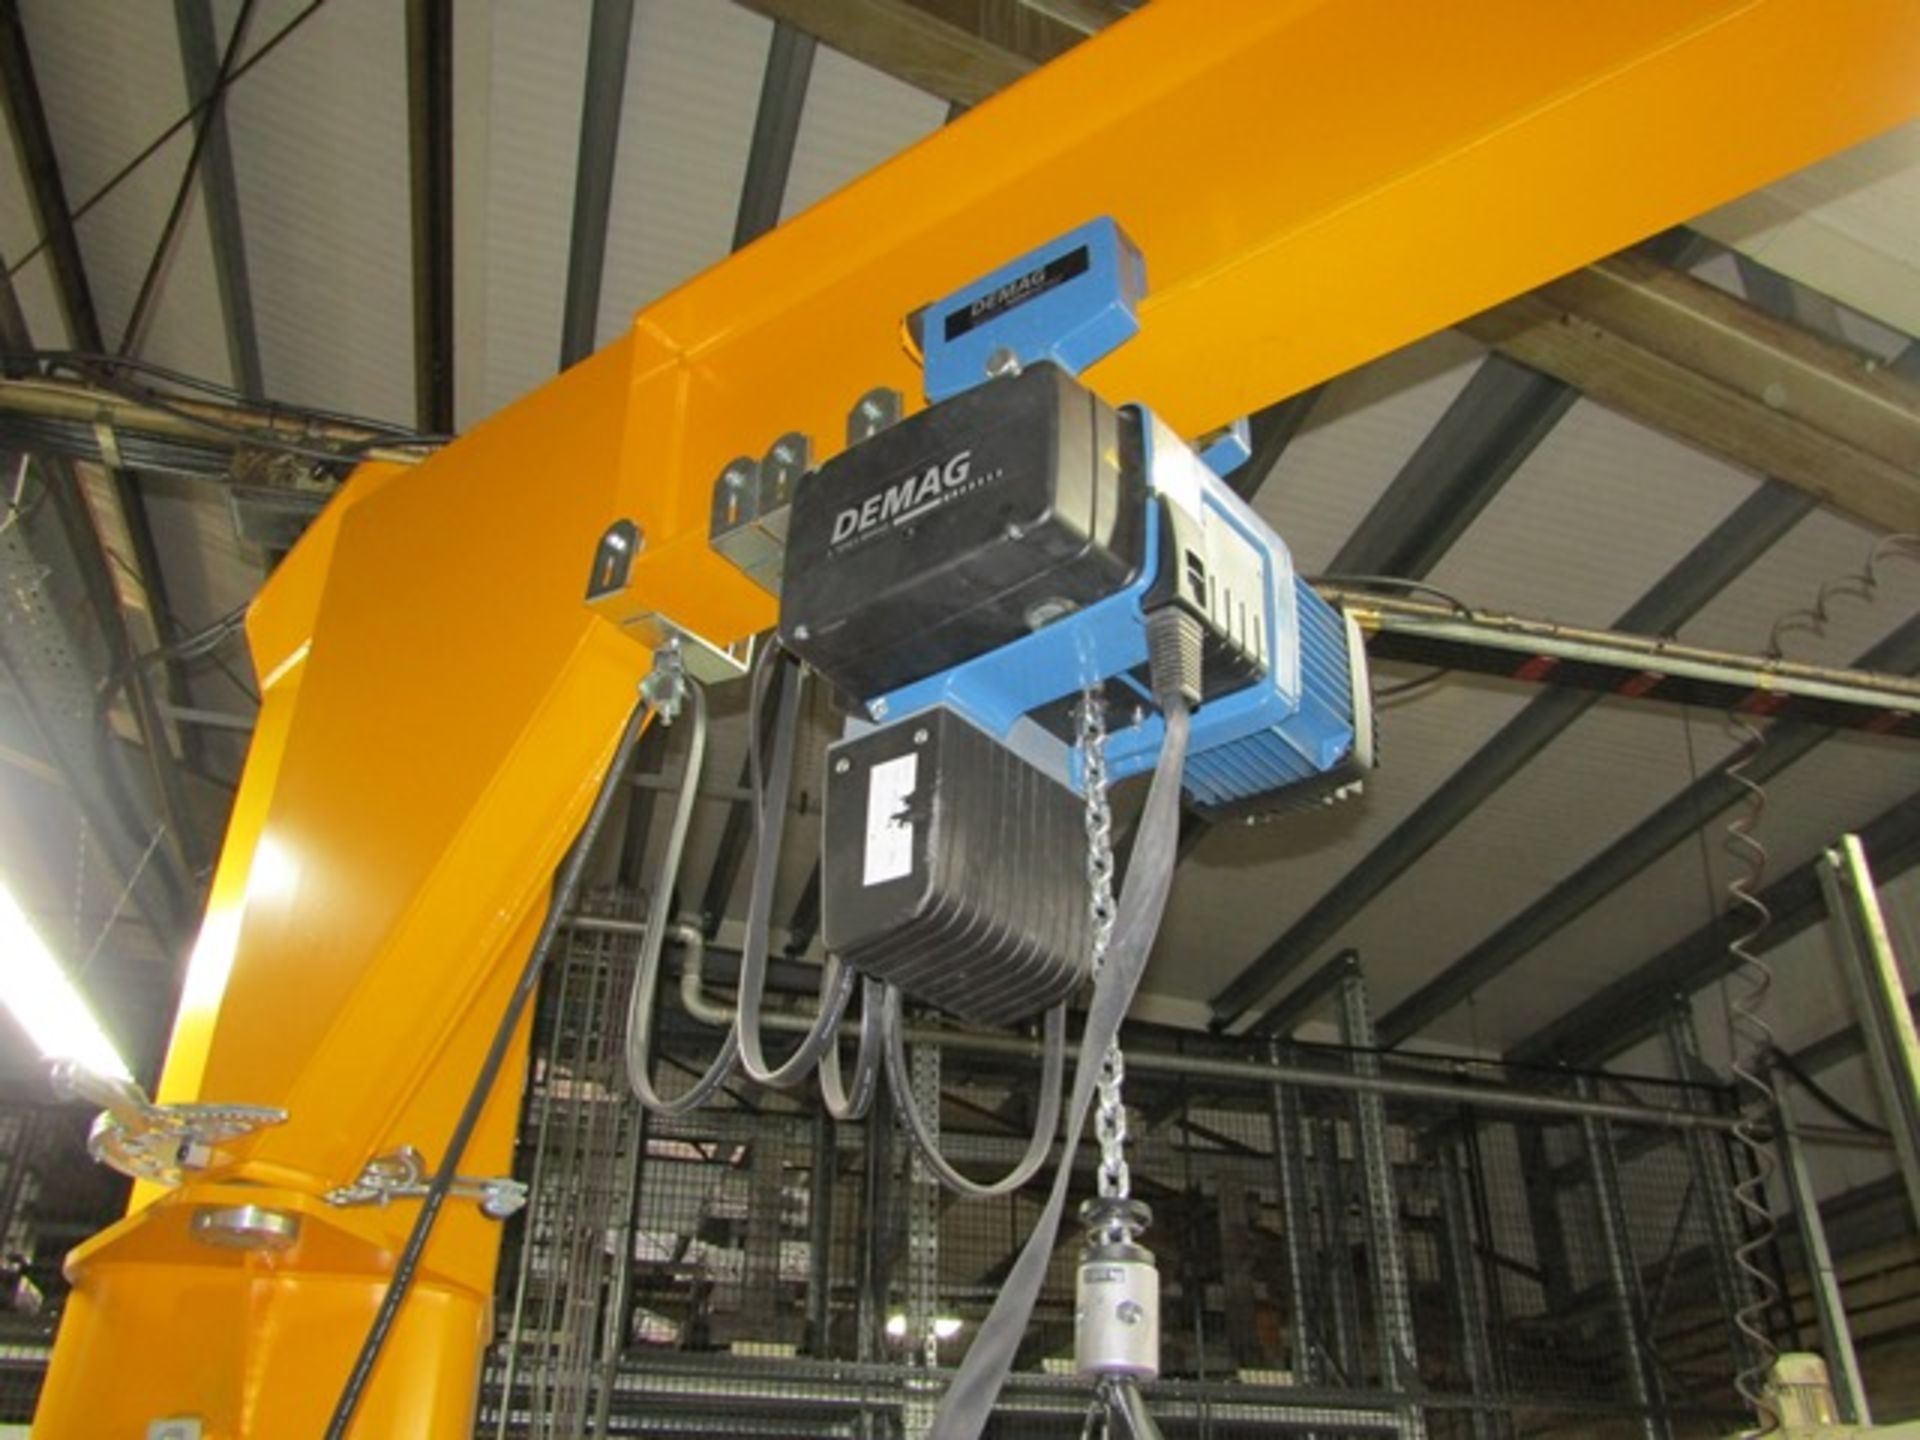 Demag 1000kg heavy duty pillar jib arm crane, approx swing 6m, fitted Demag 1000kg, electric chain - Image 2 of 5